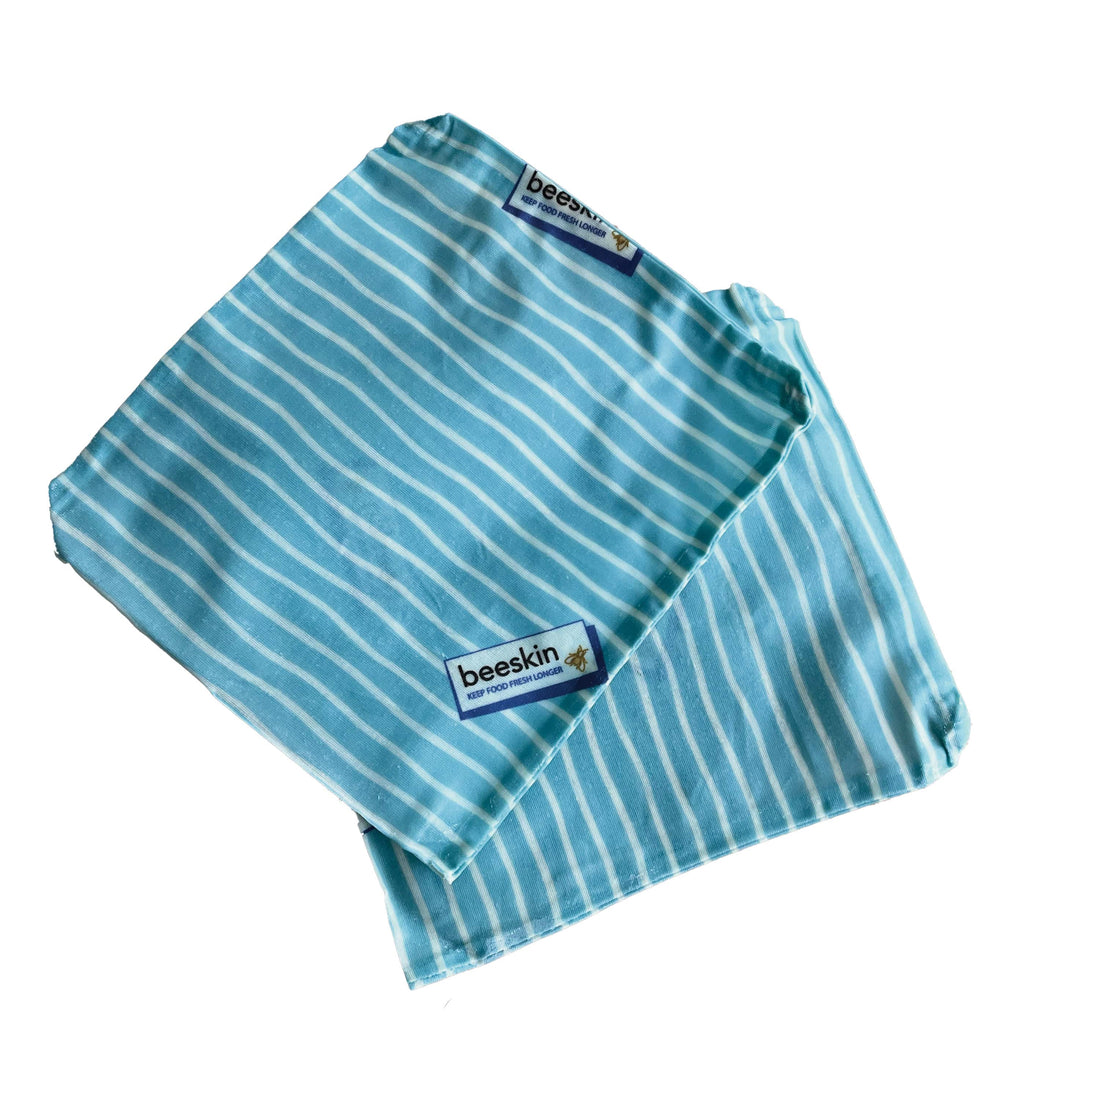 two blue beeswax bag s with white stripes